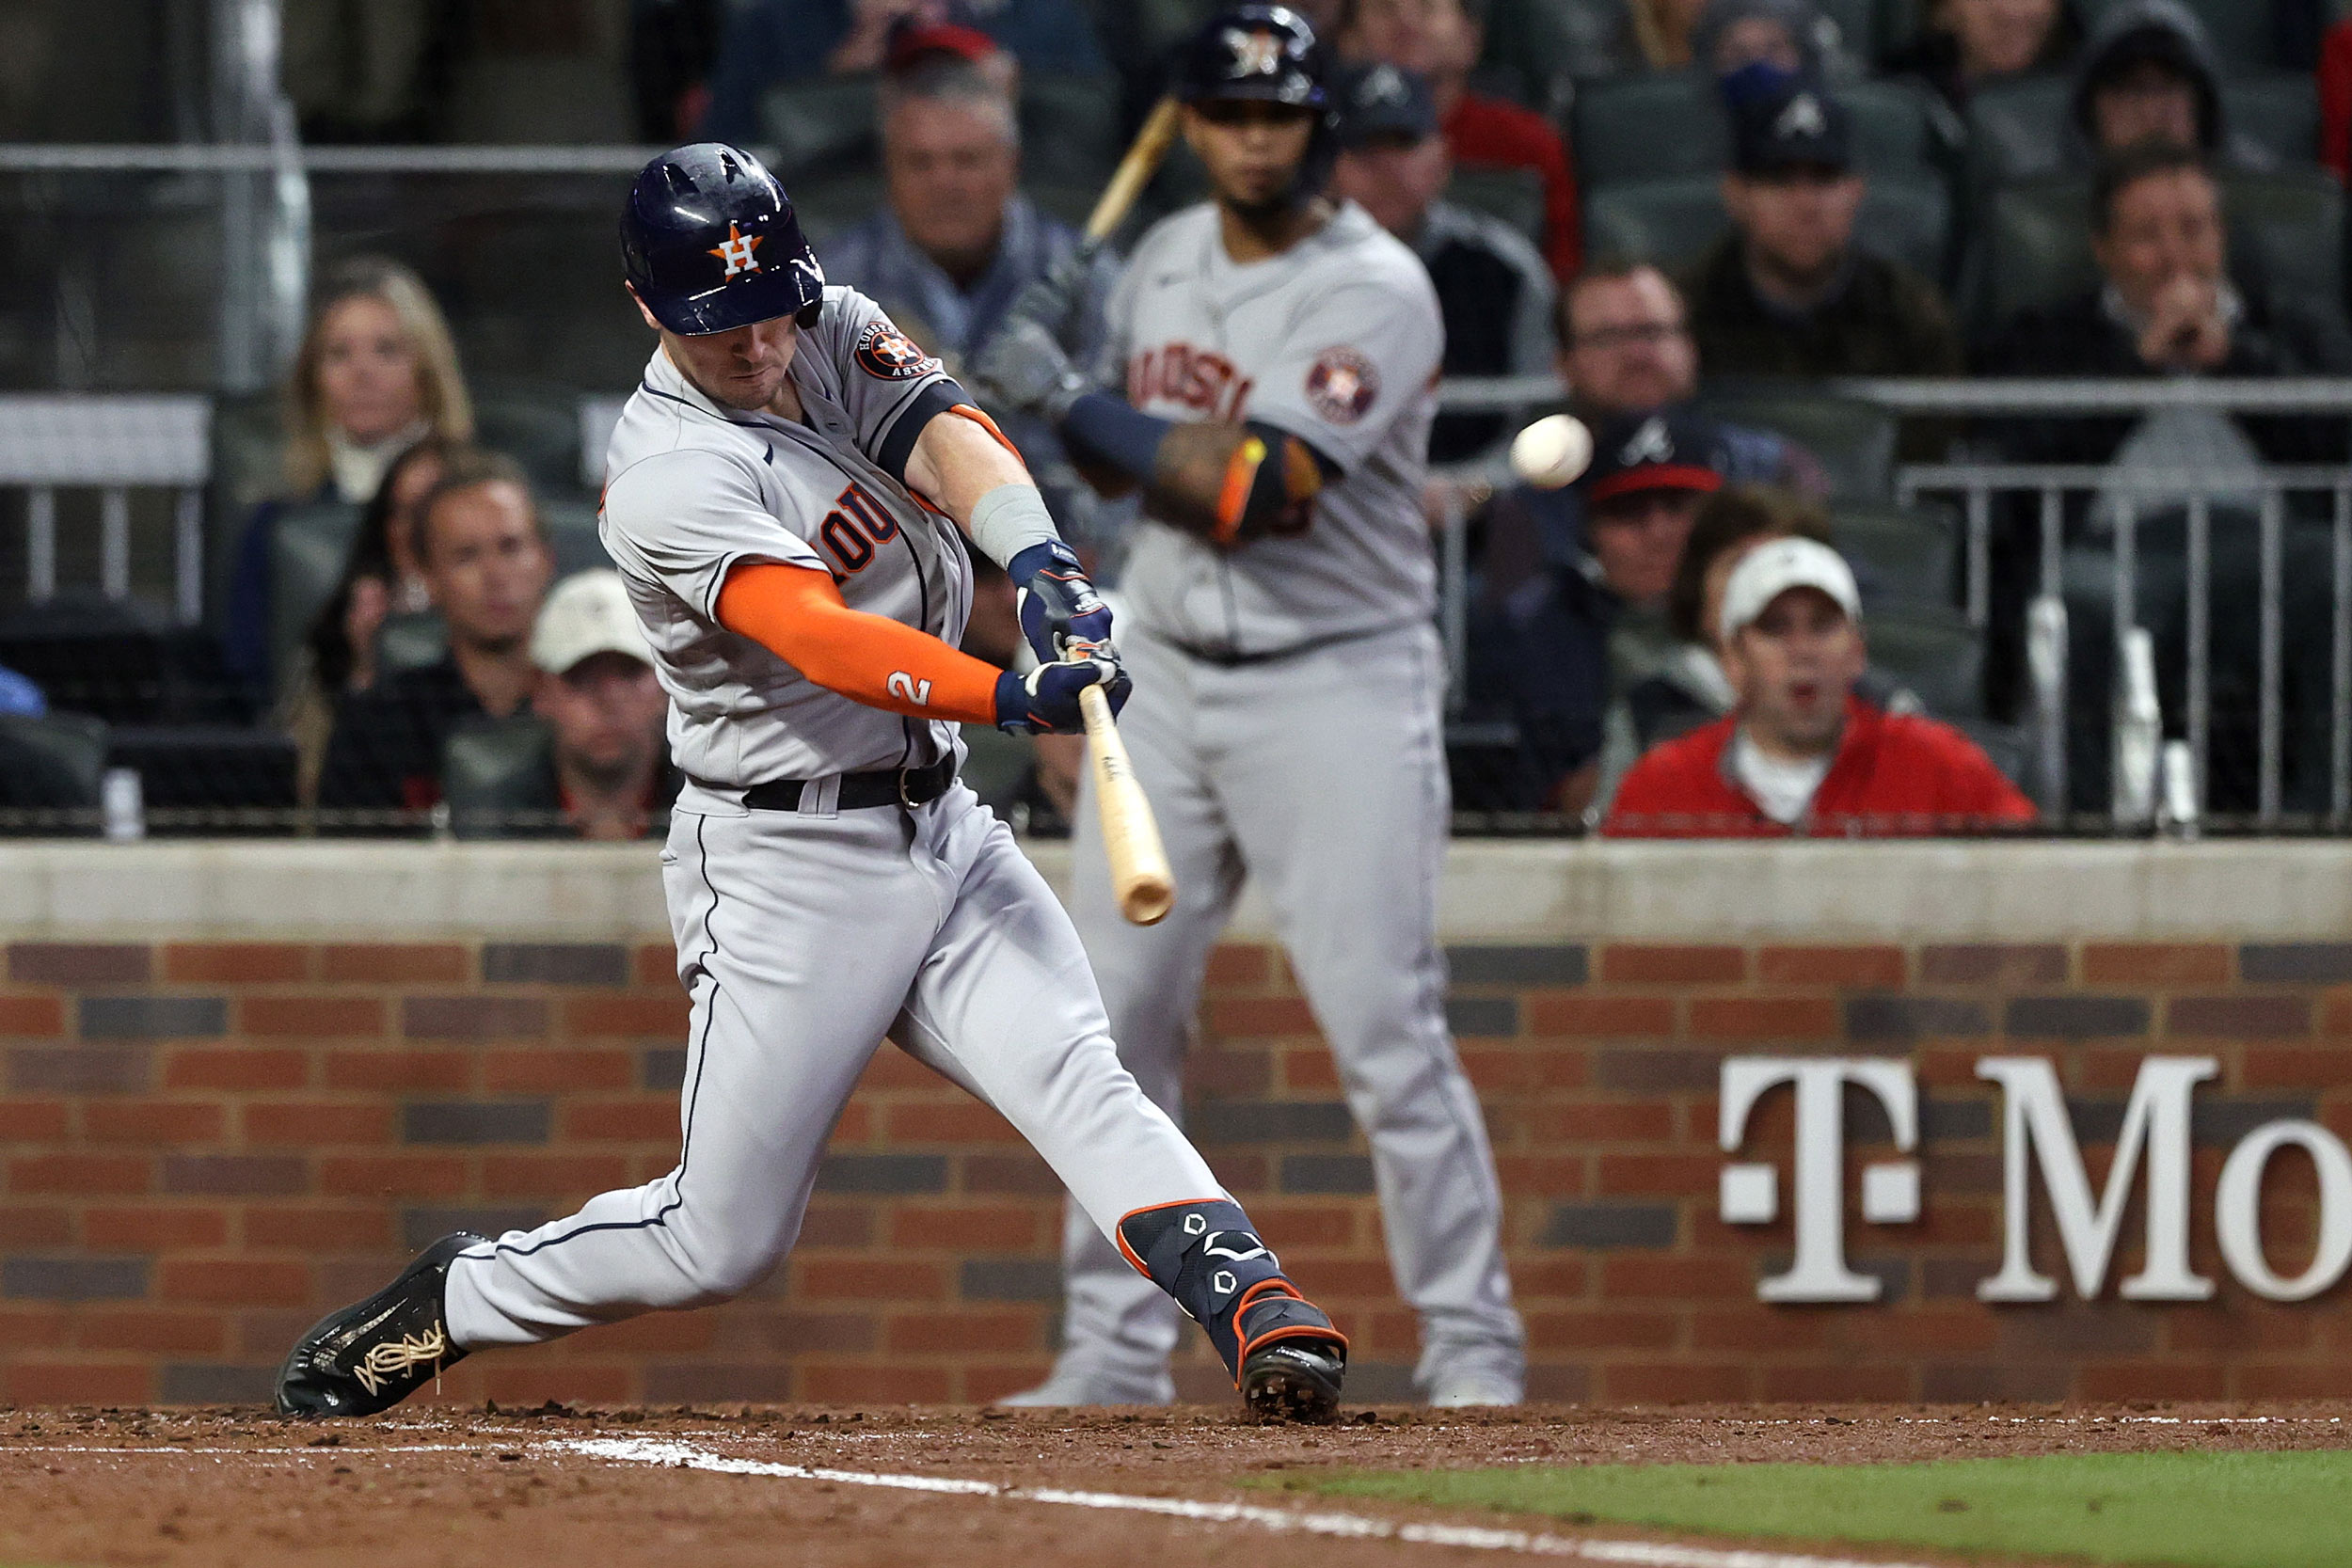 Alex Bregman of the Astros hits an RBI double during the second inning.